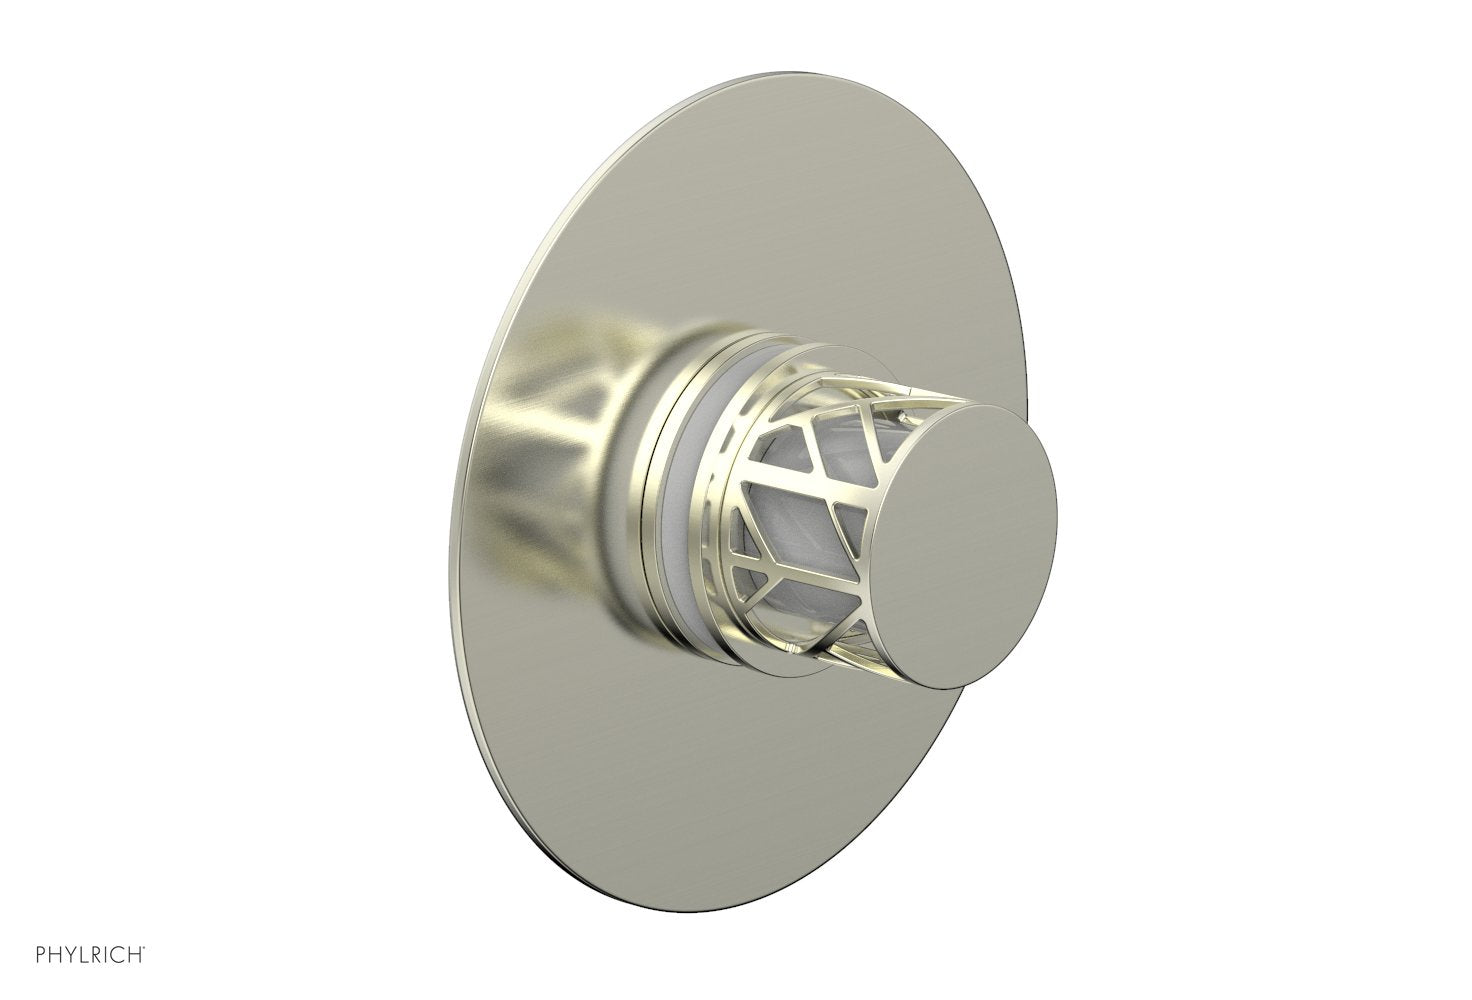 Phylrich JOLIE Thermostatic Shower Trim, Round Handle with "White" Accents